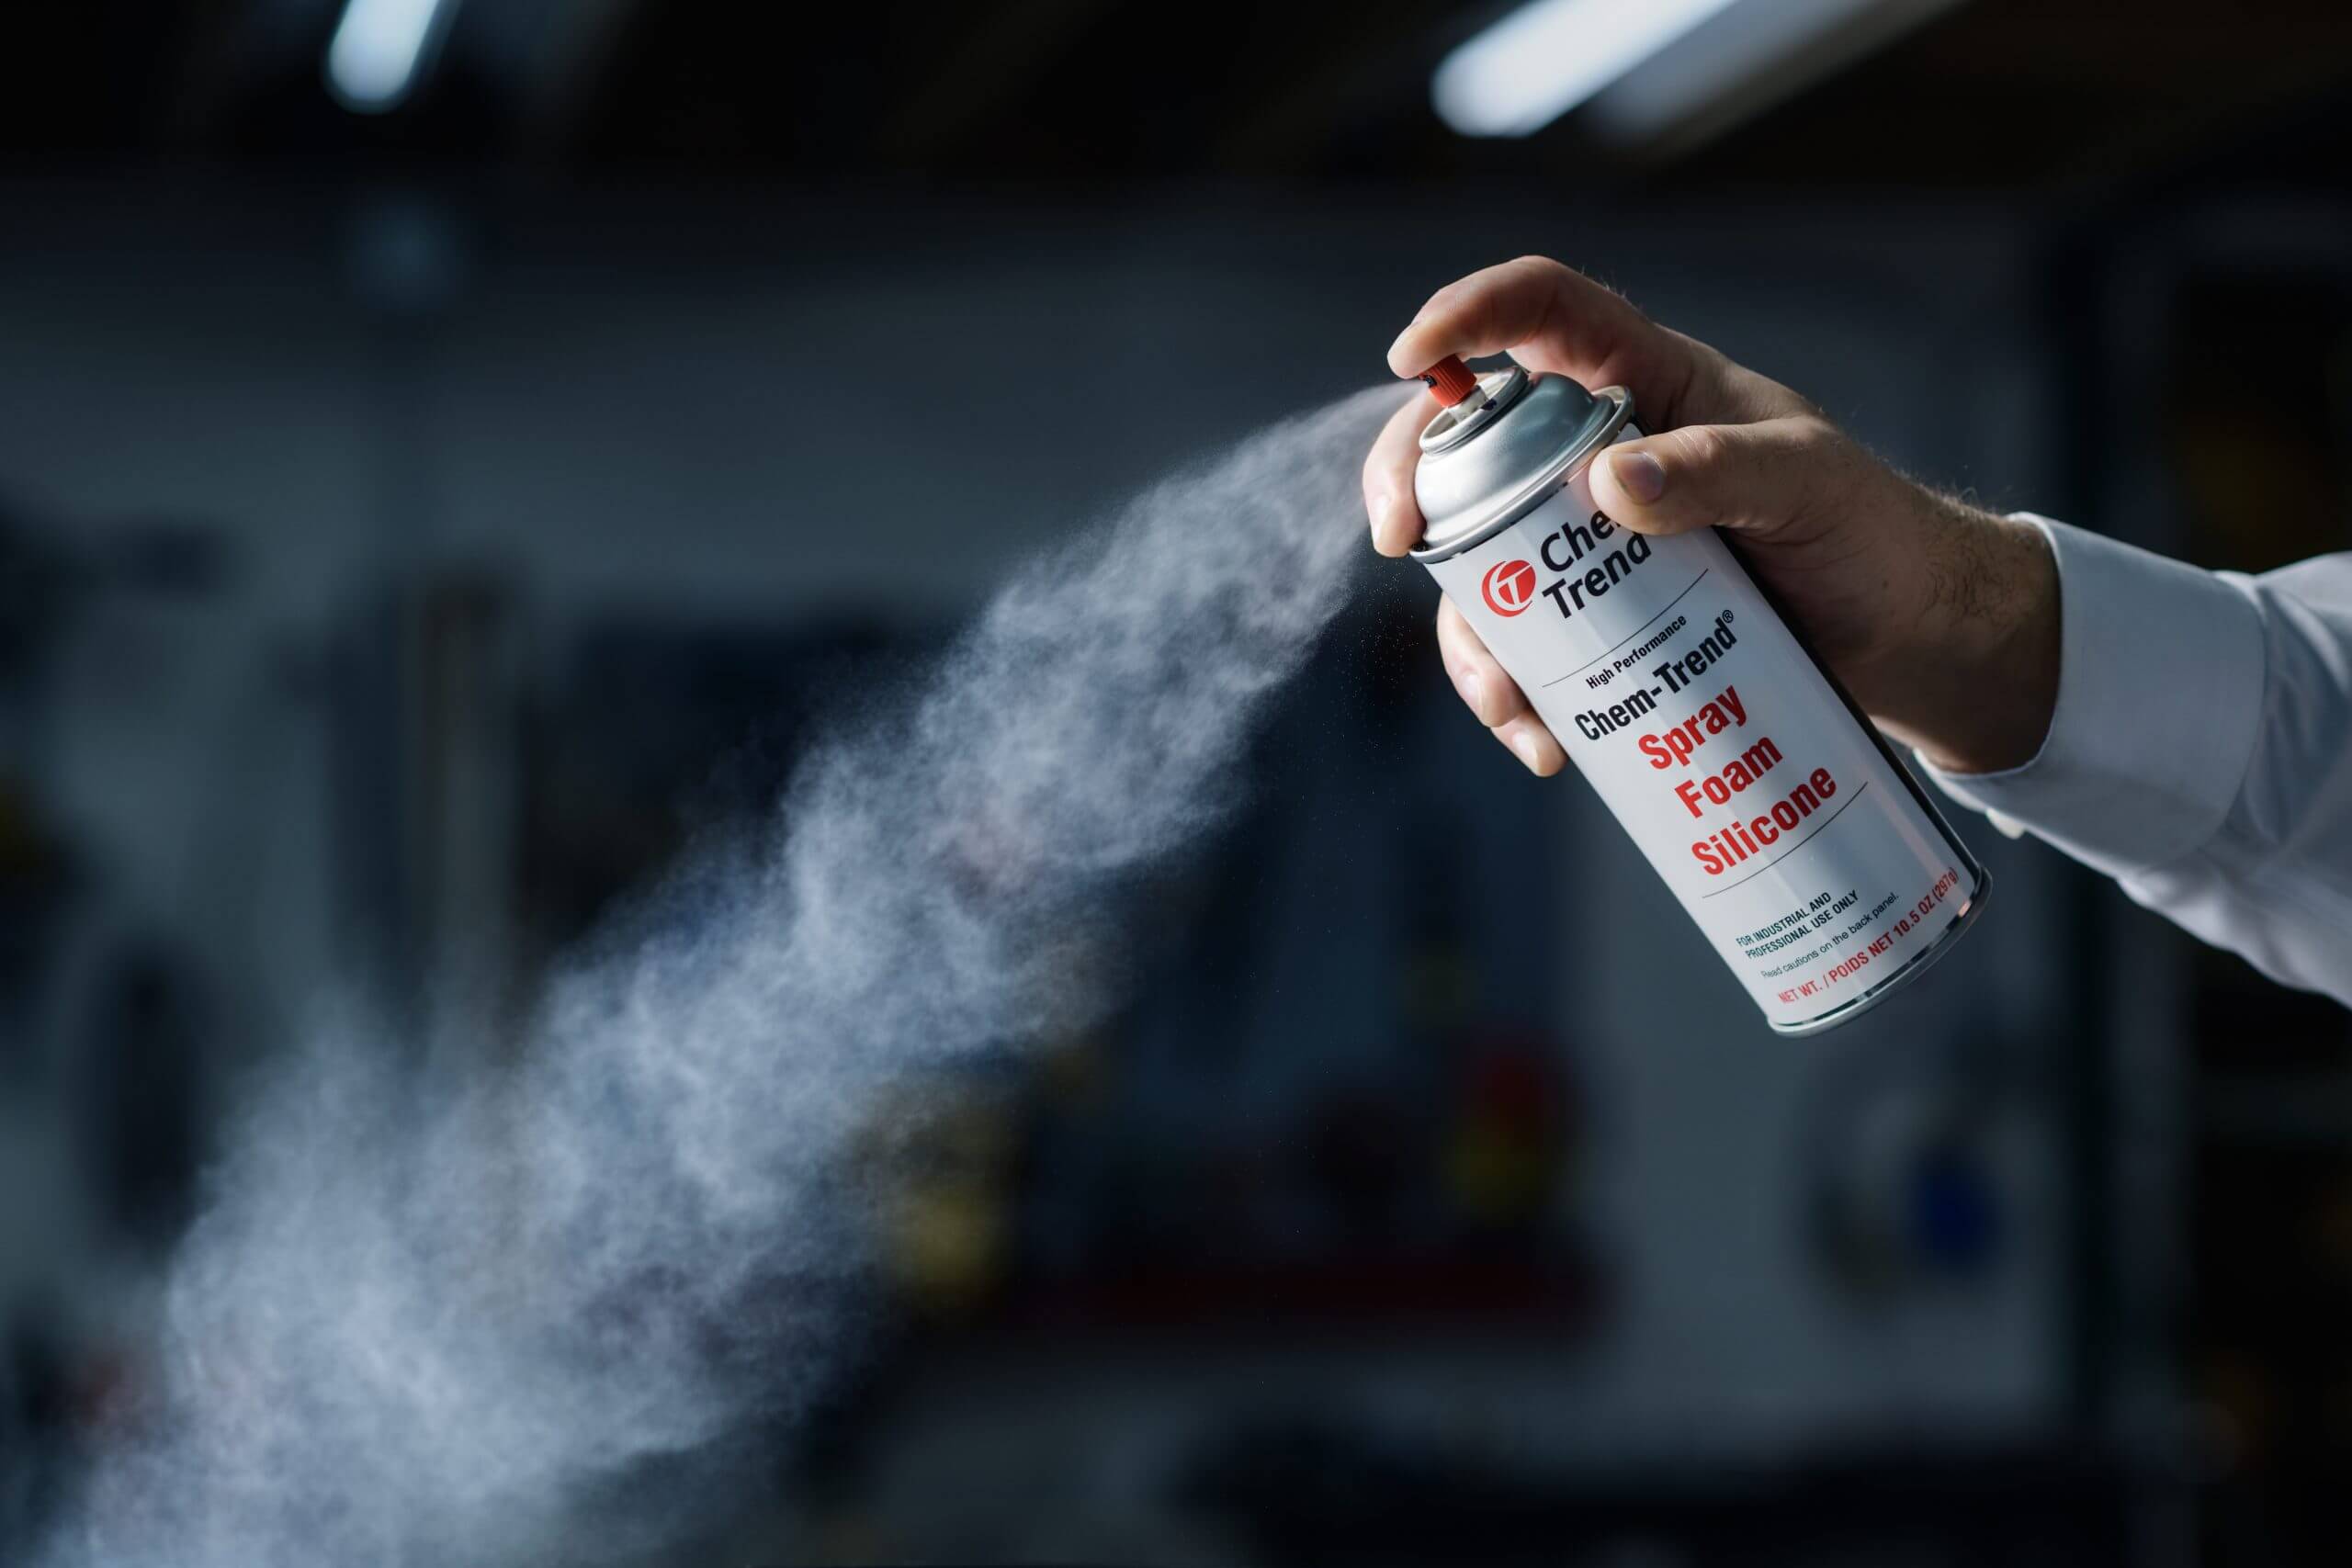 A hand spraying Chem-Trend Spray Foam Silicone from a canister.